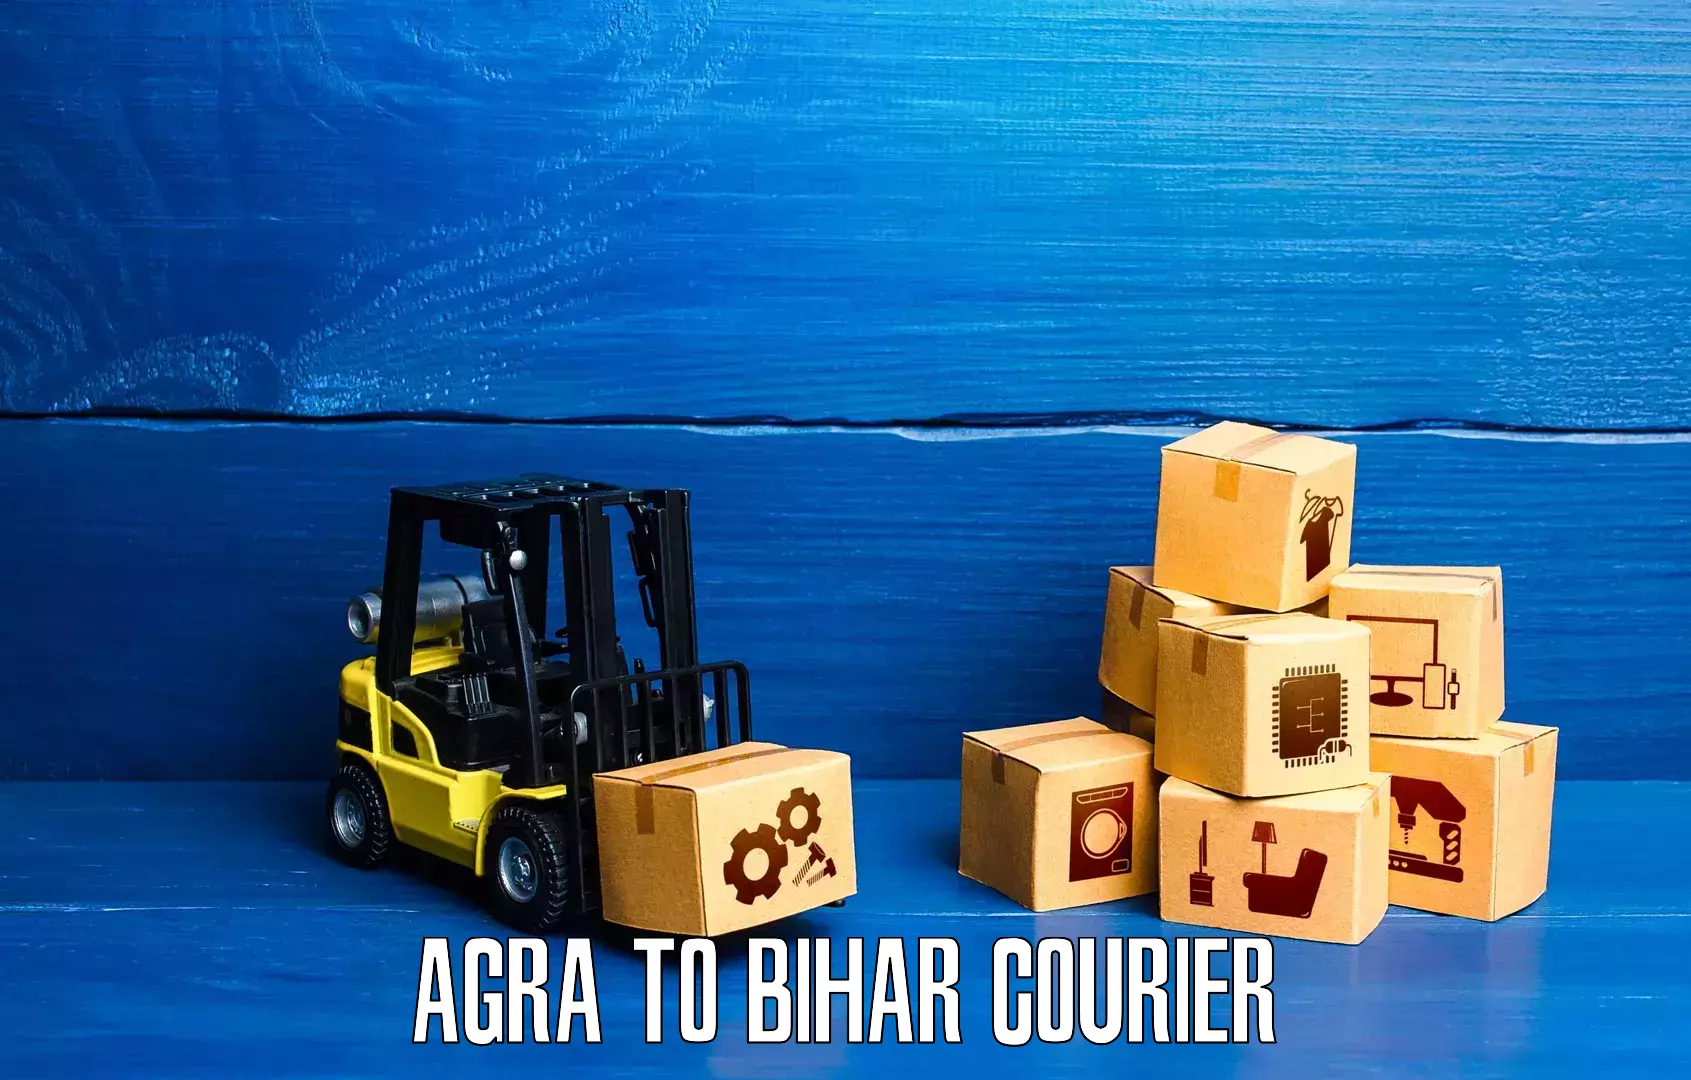 Professional courier handling Agra to Dehri